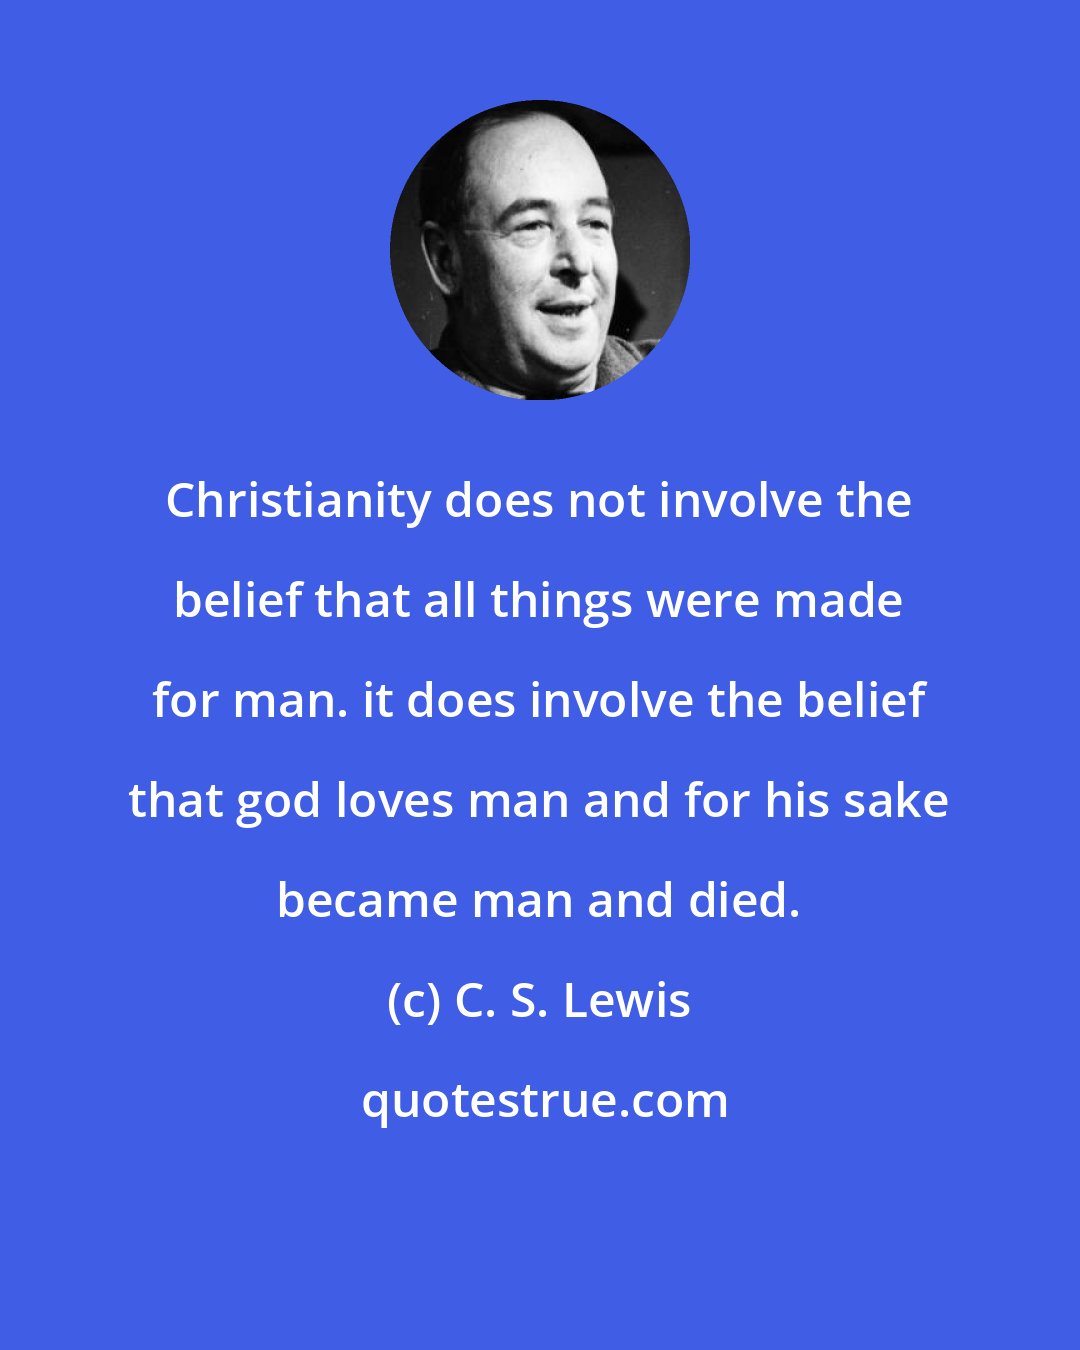 C. S. Lewis: Christianity does not involve the belief that all things were made for man. it does involve the belief that god loves man and for his sake became man and died.